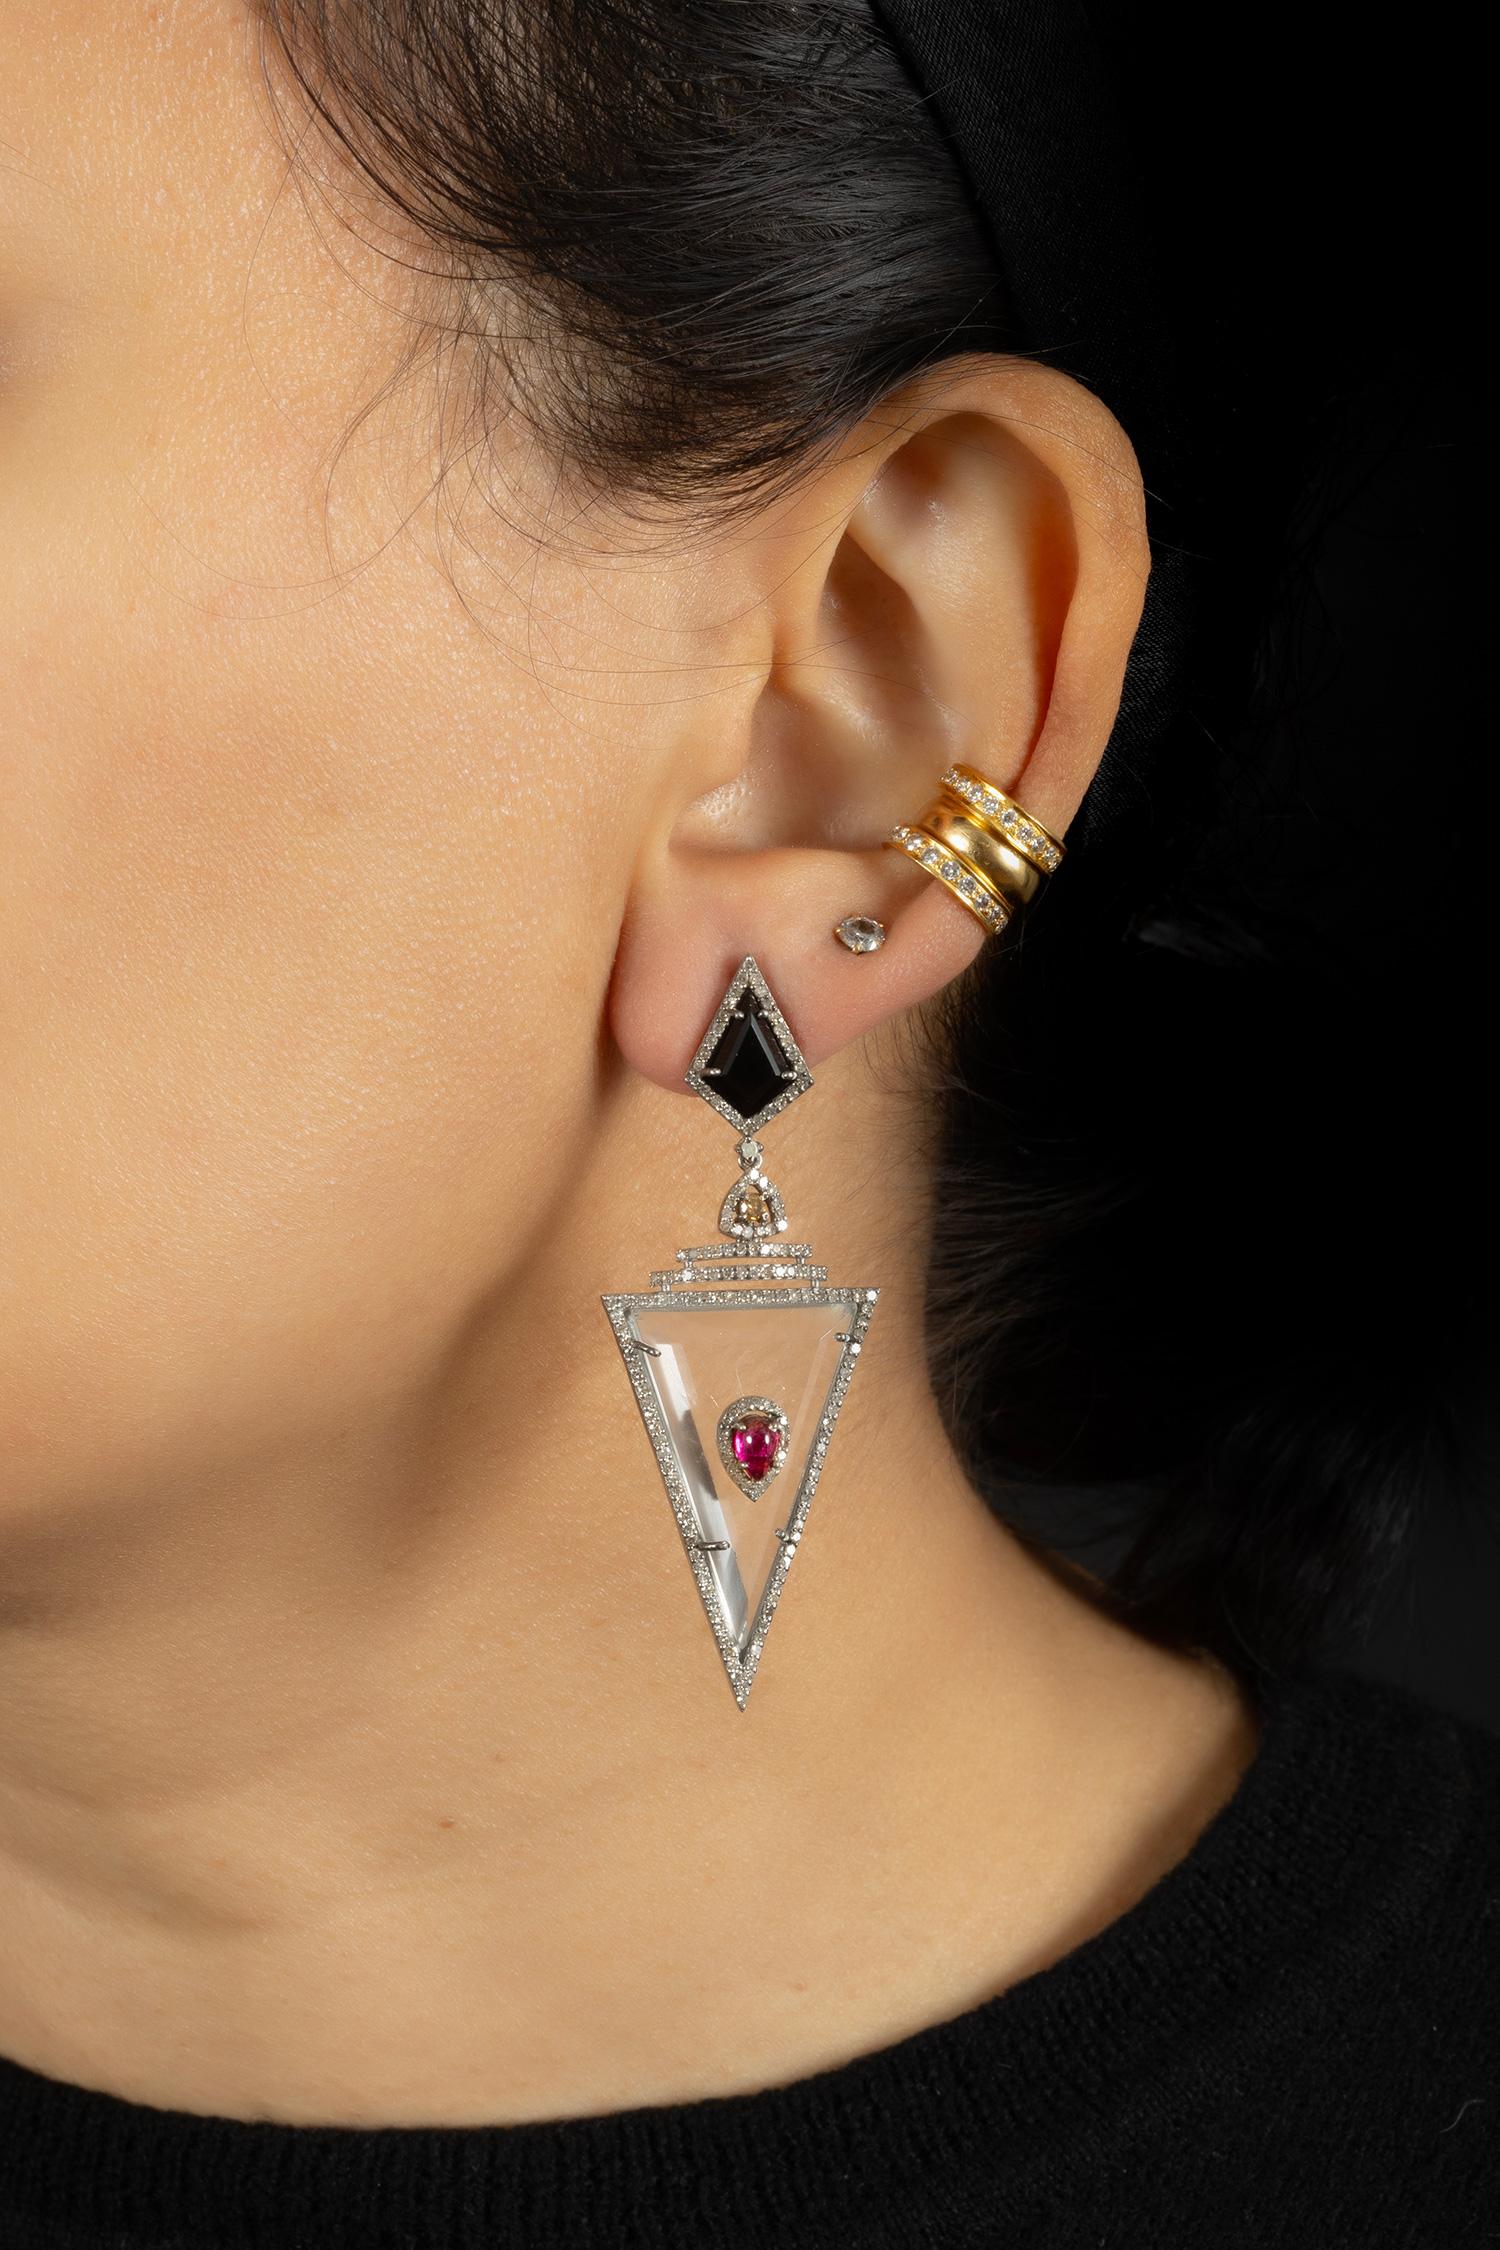 A pretty art deco inspired drop earring set on silver with 14kt gold push backs for the ears.

Single cut diamonds (1.55 carat); Crystal & Tourmaline (18 carat); Black Onyx (0.80 carat)

Very light weight for pierced ears; 5.5 cm in full